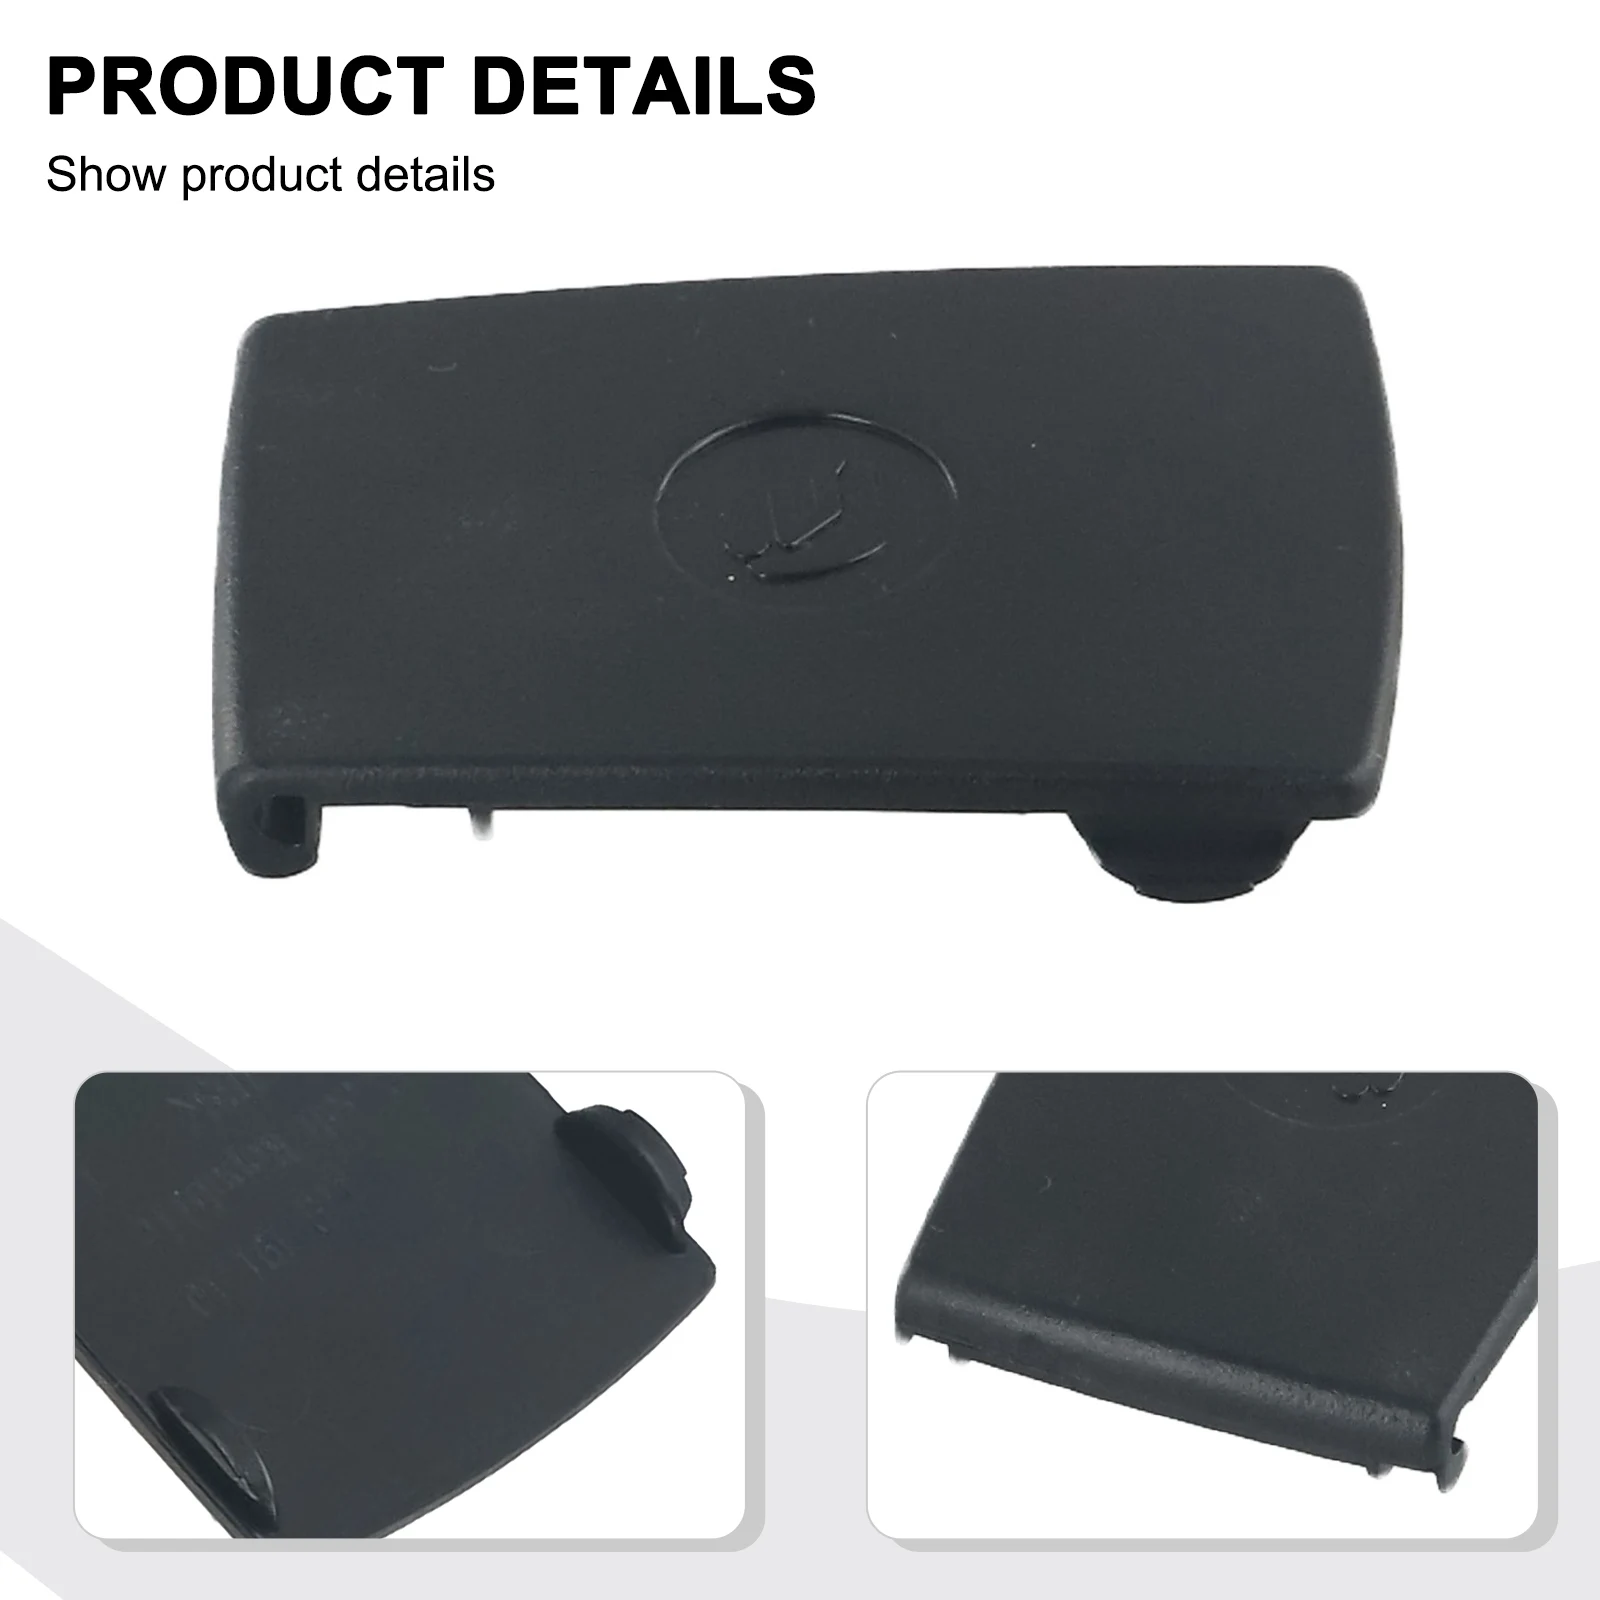 

Car Seat Accessories Child Seat Rear Seat 17949110 52207319686 Accessory Flap Portable Rear Child Safety Seat Seat Cover Flap